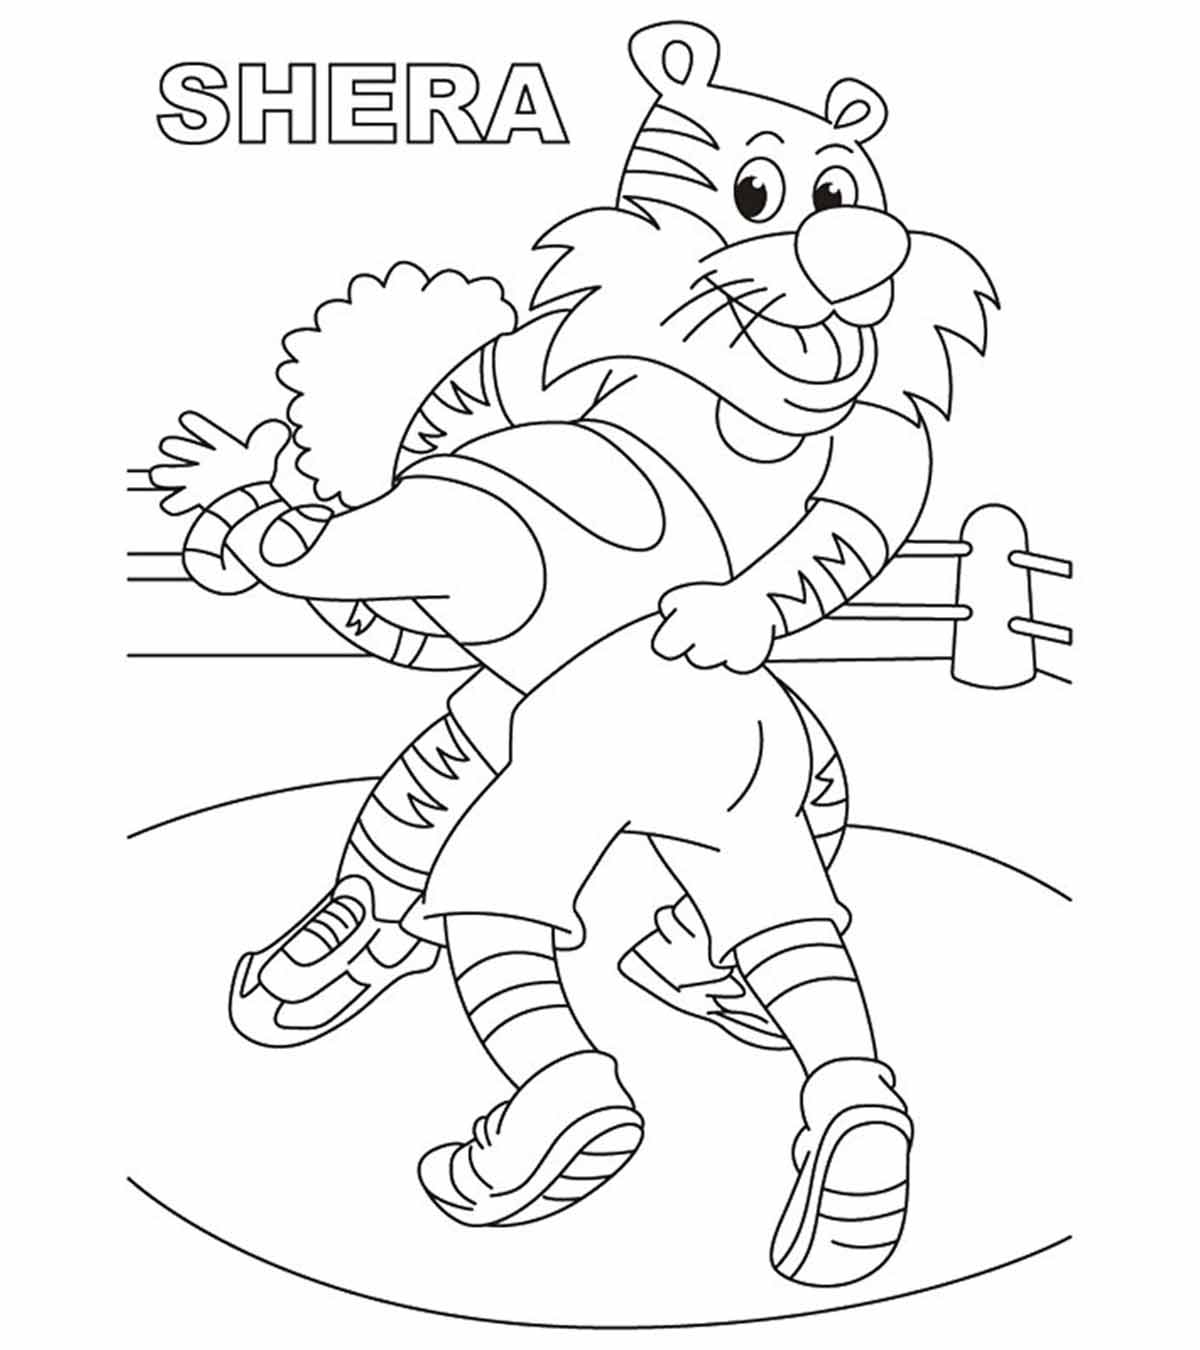 Top 10 Wrestling Coloring Pages For Your Little One